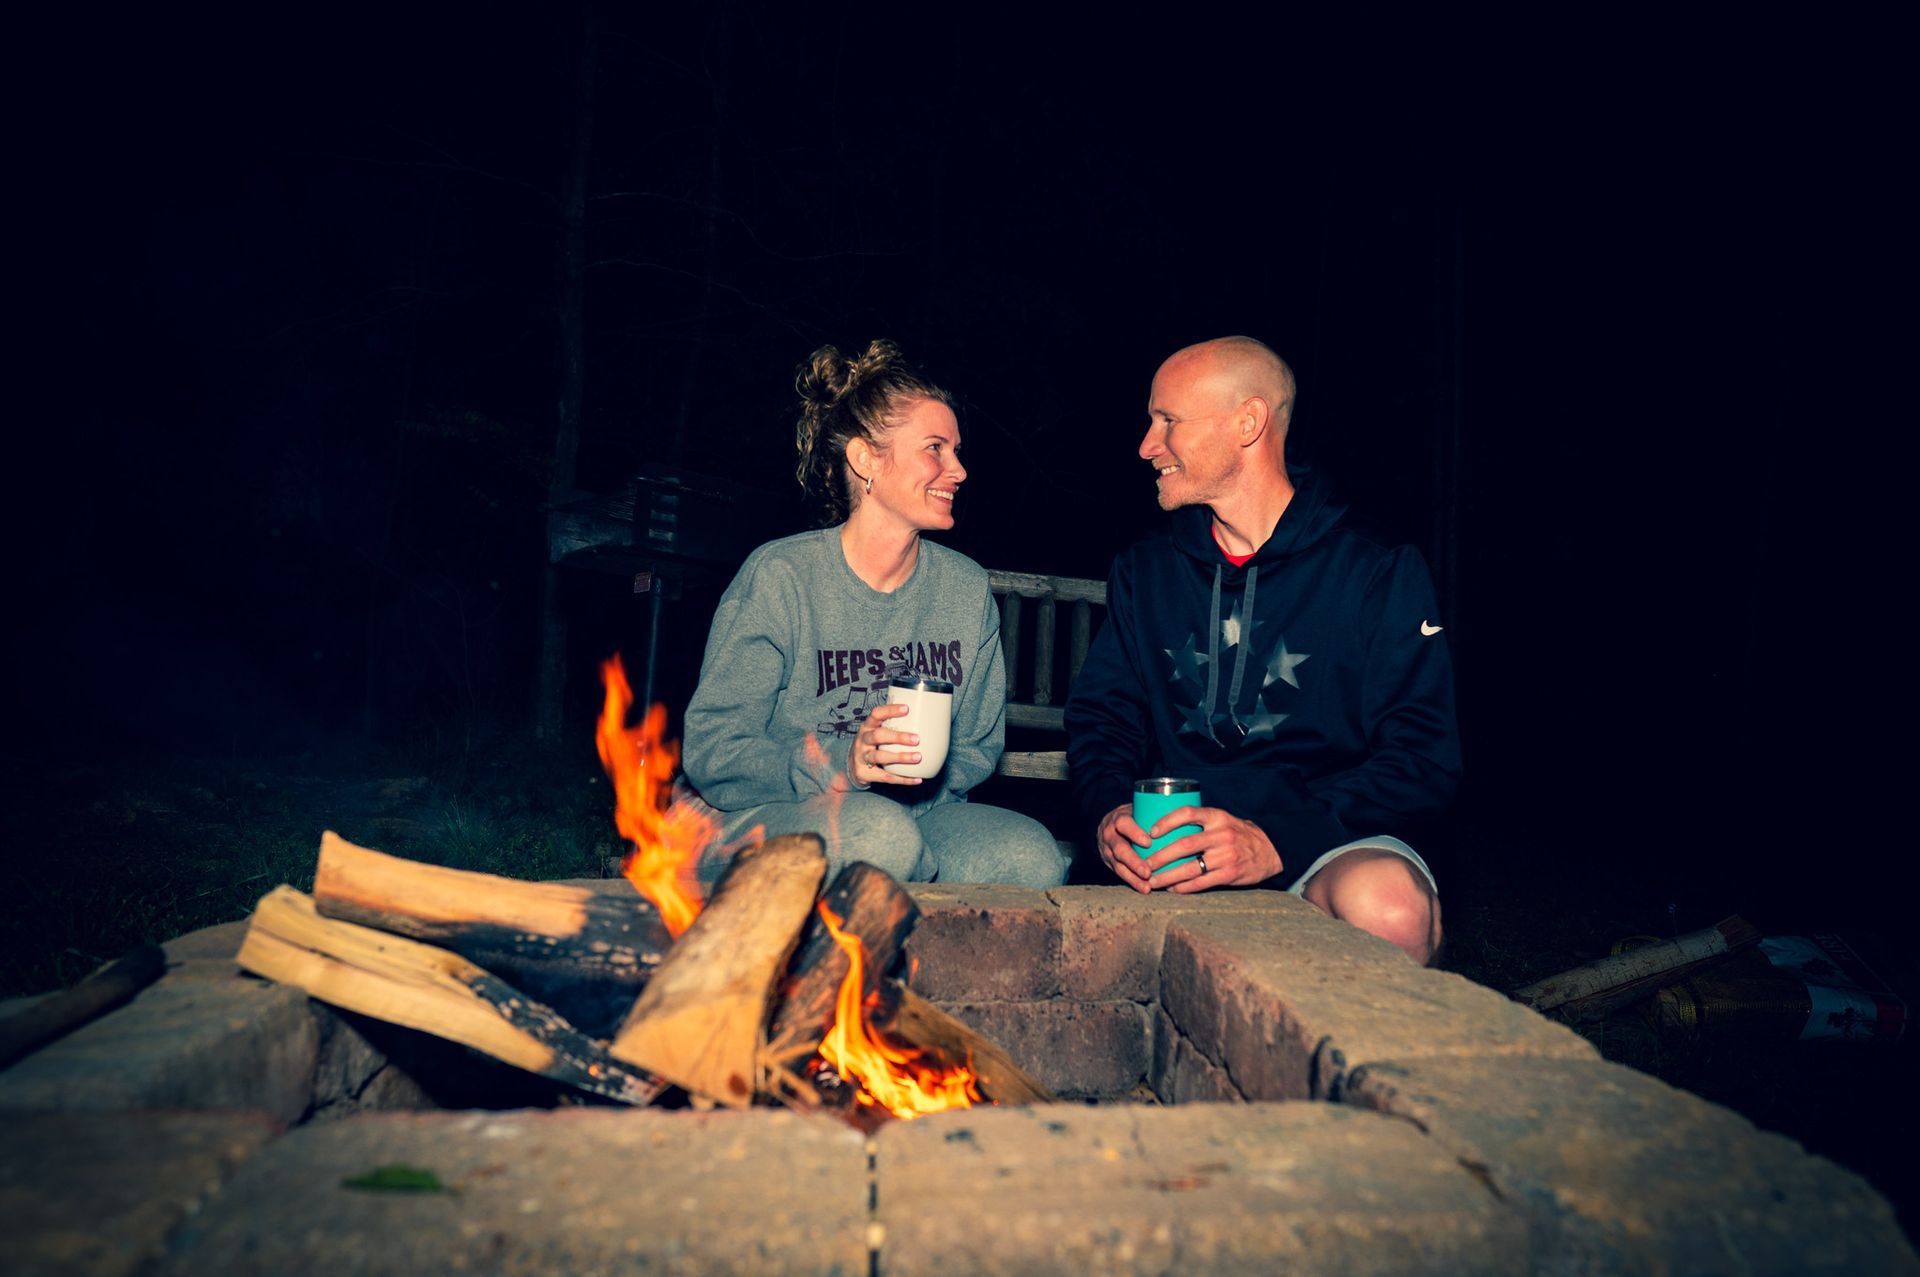 a man and a woman are sitting around a fire pit at night .